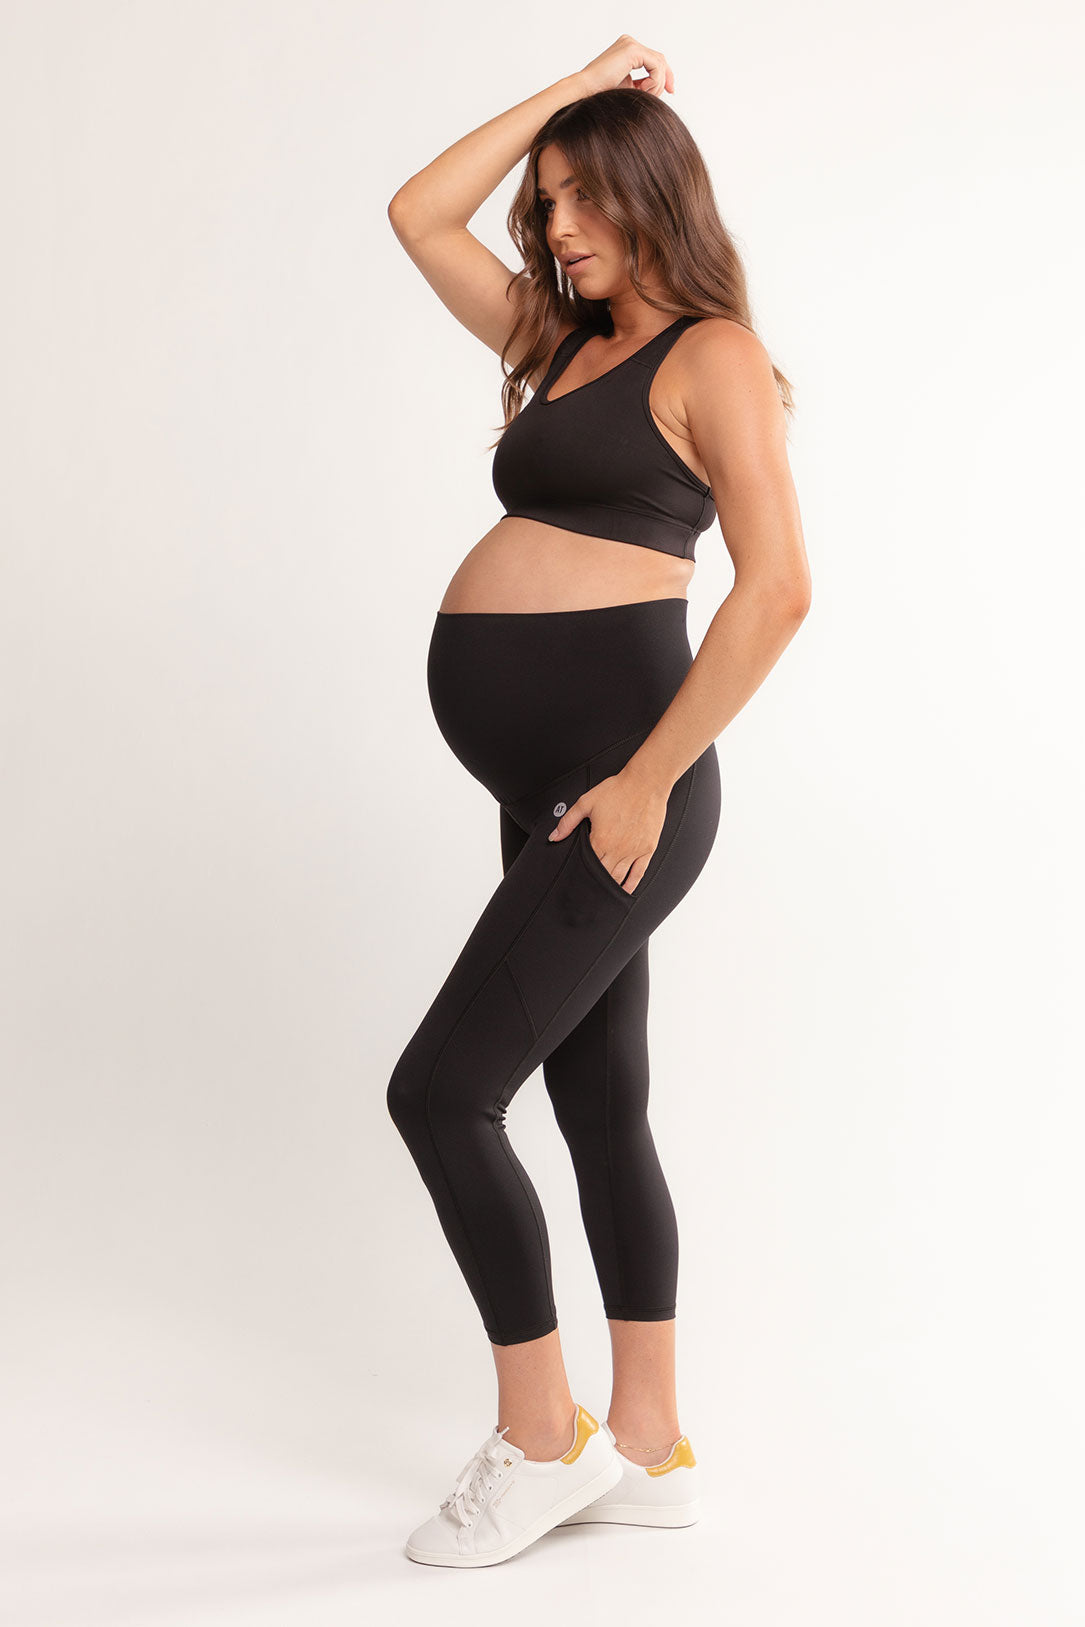 Maternity Yoga Clothes: What to Wear When Pregnant. Nike.com